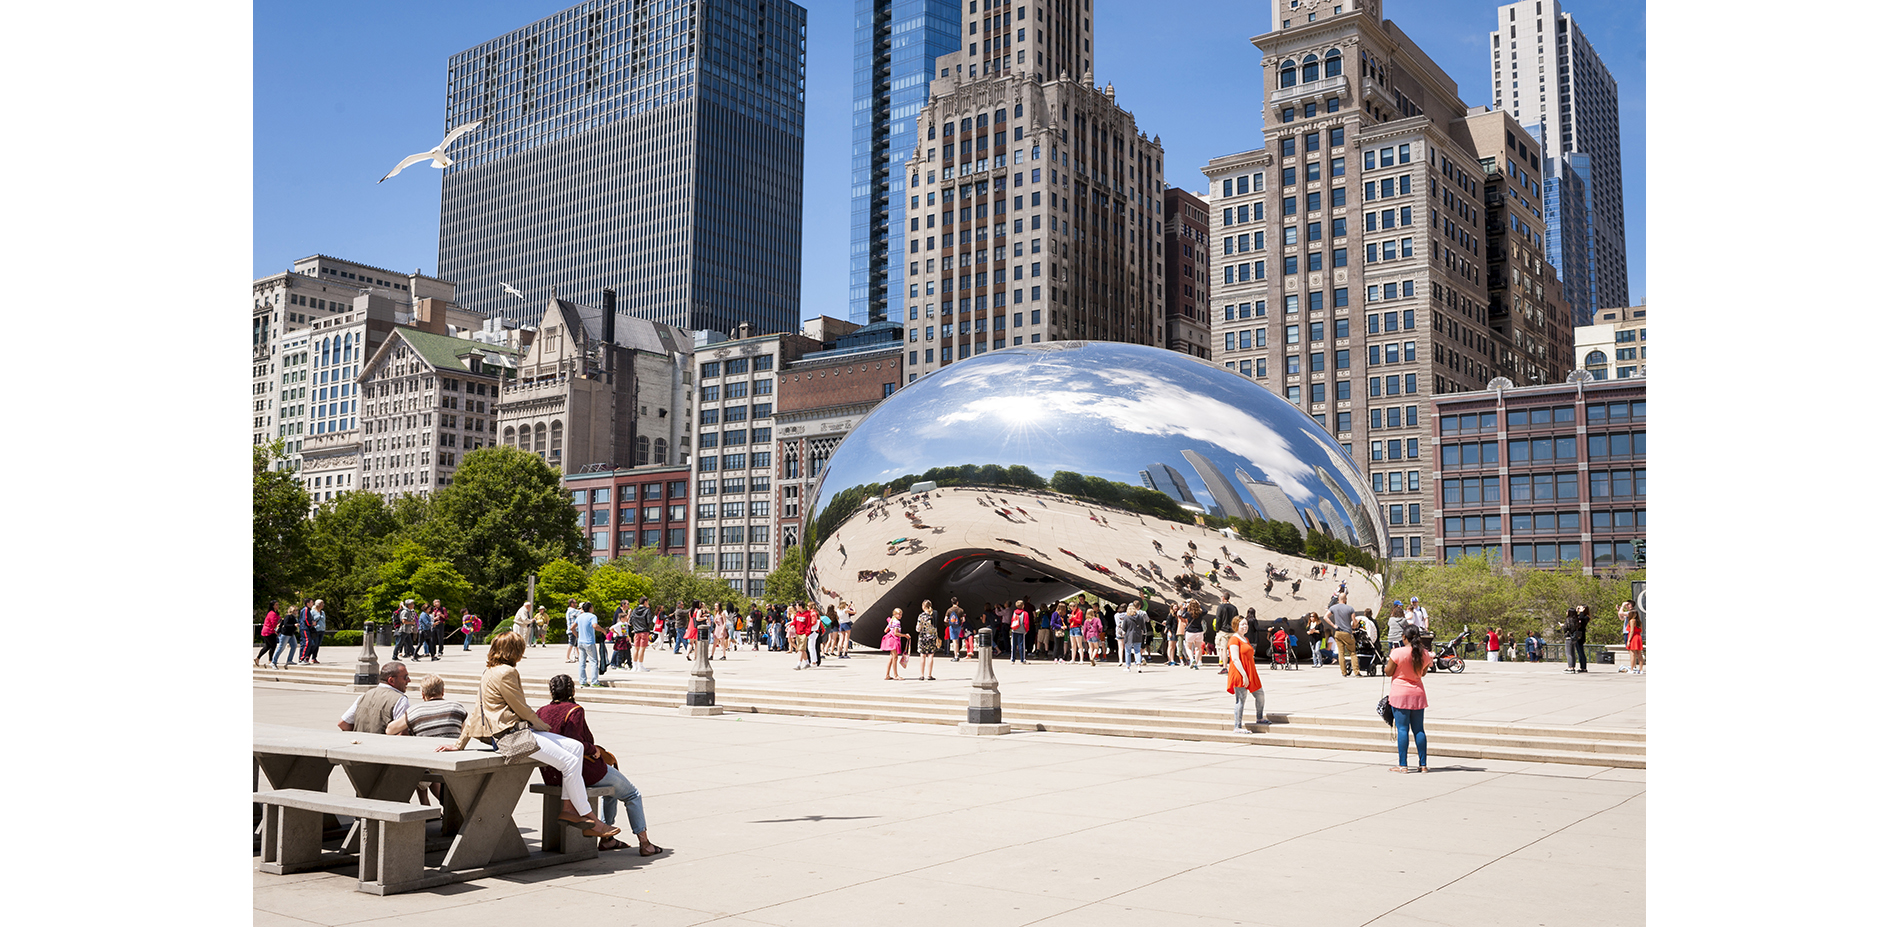 "Cloud Gate" by Anish Kapoor